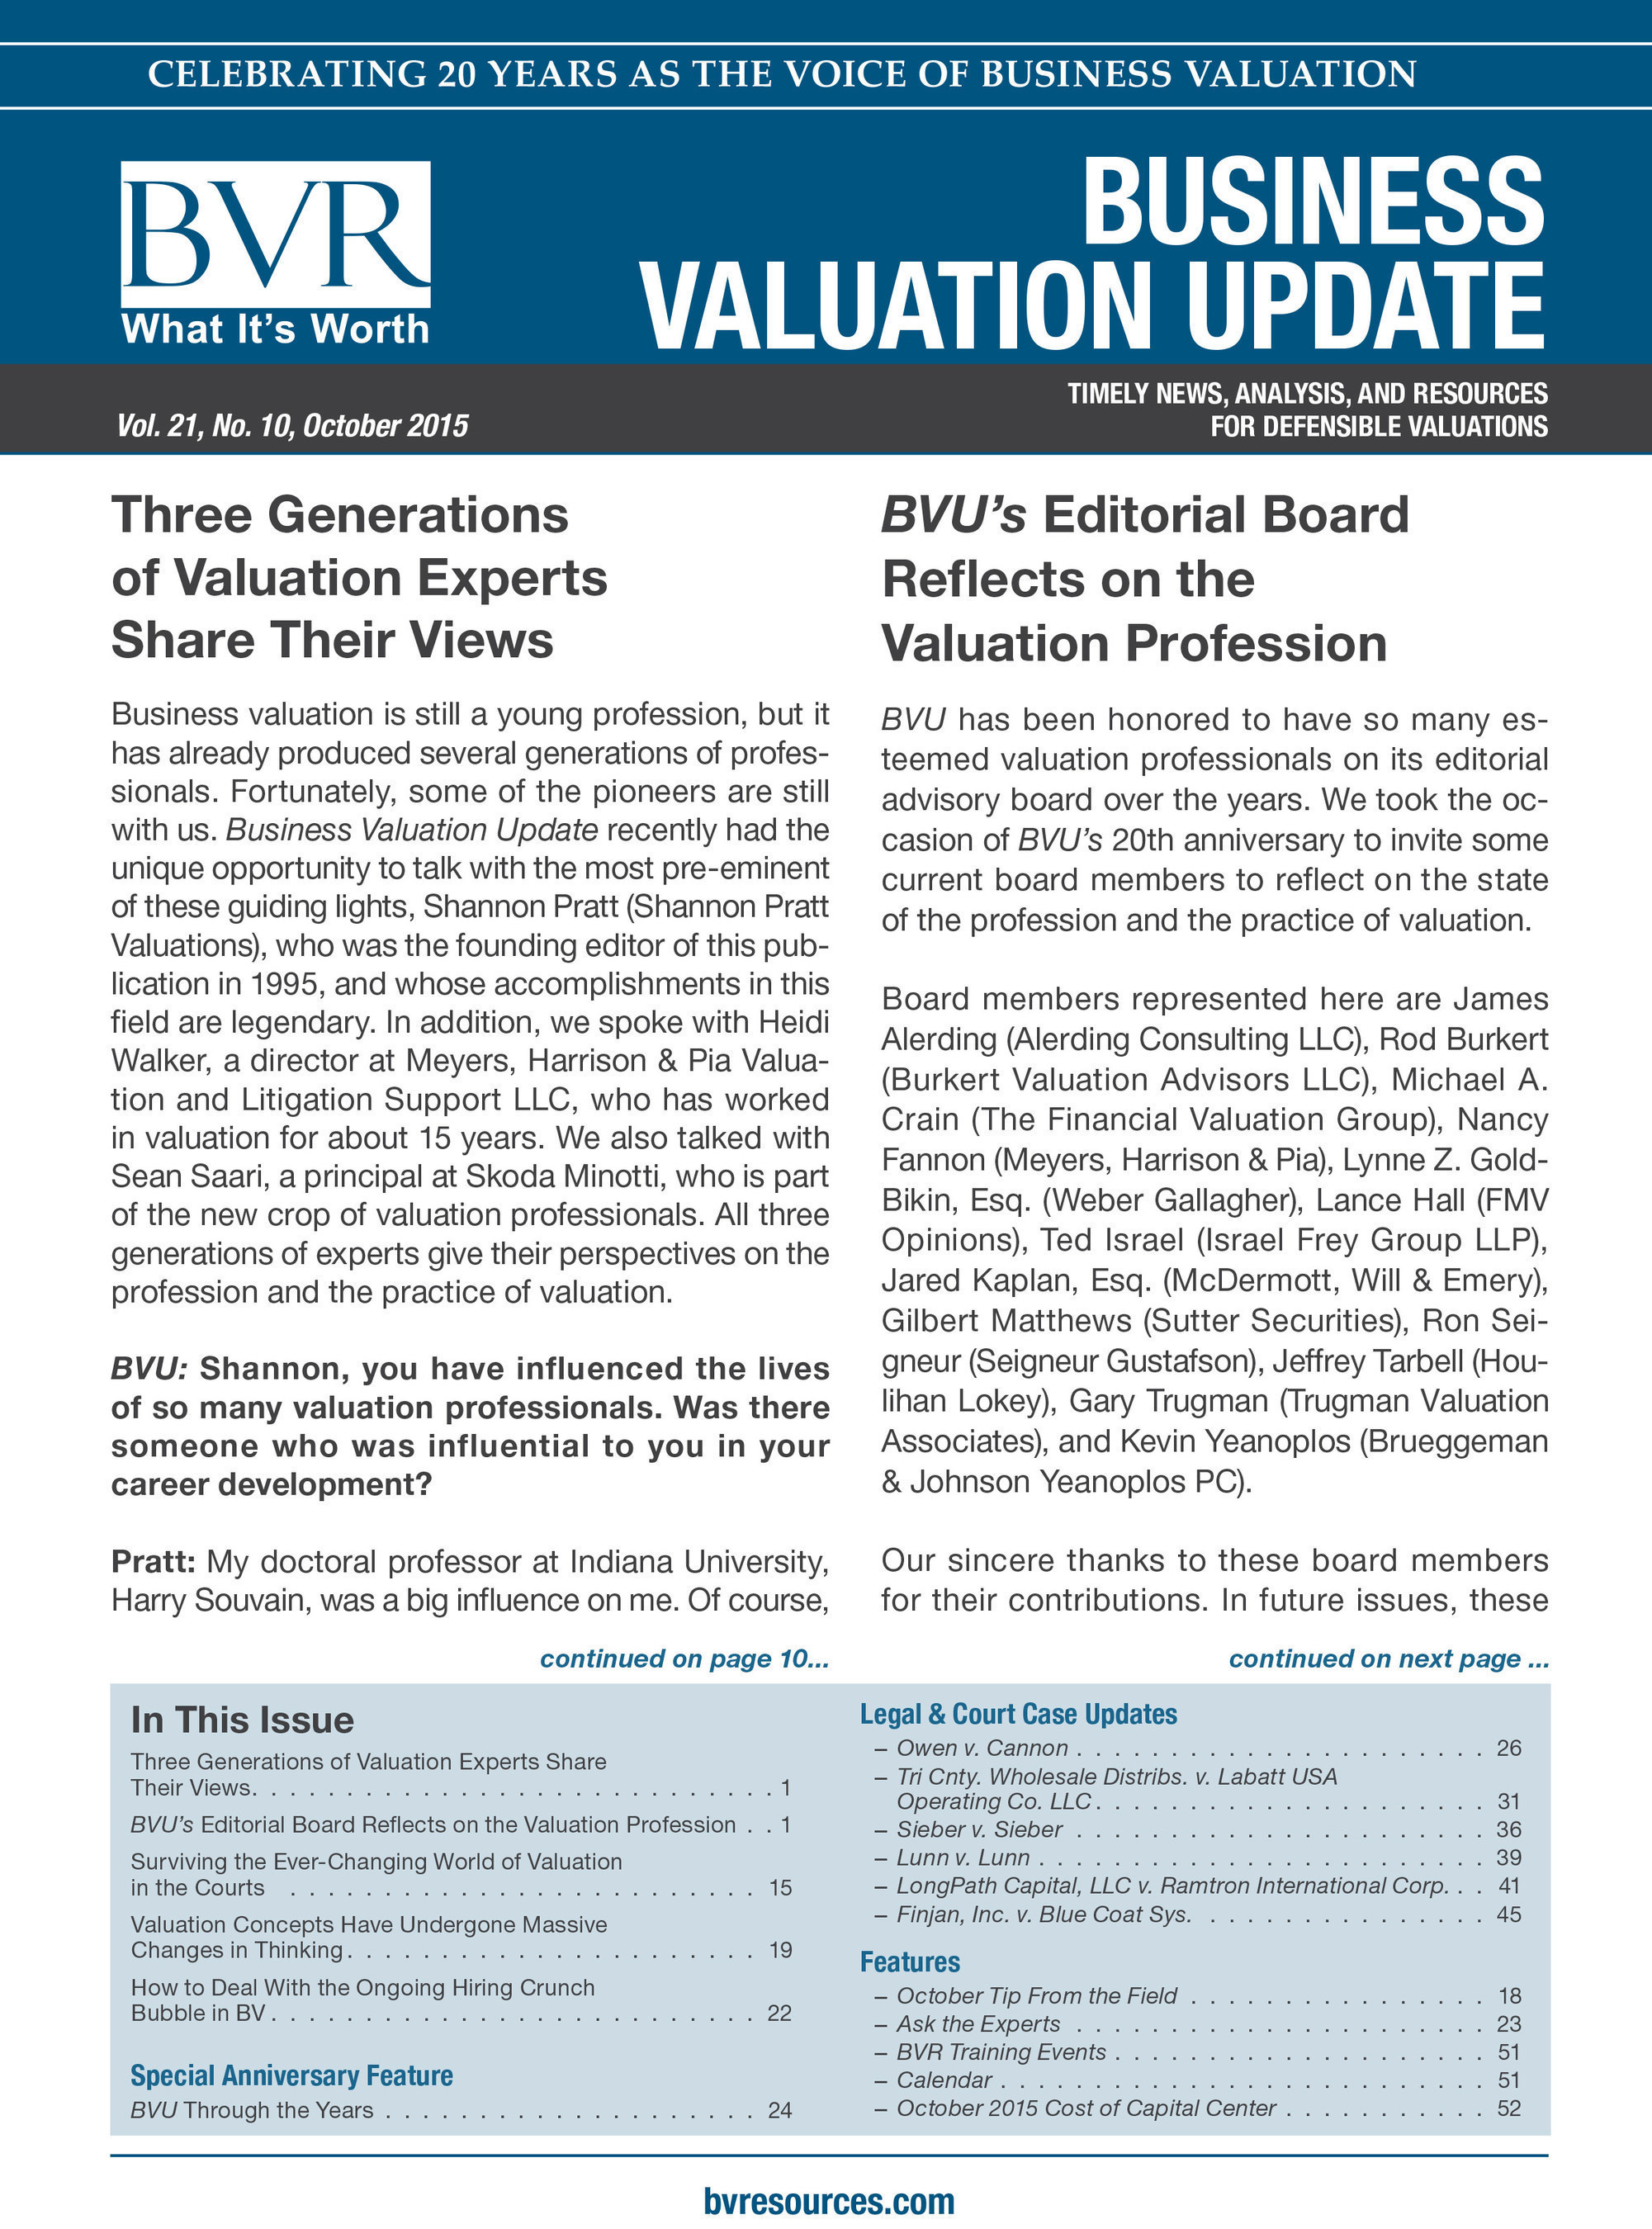 Business Valuation Update celebrates 20 years.